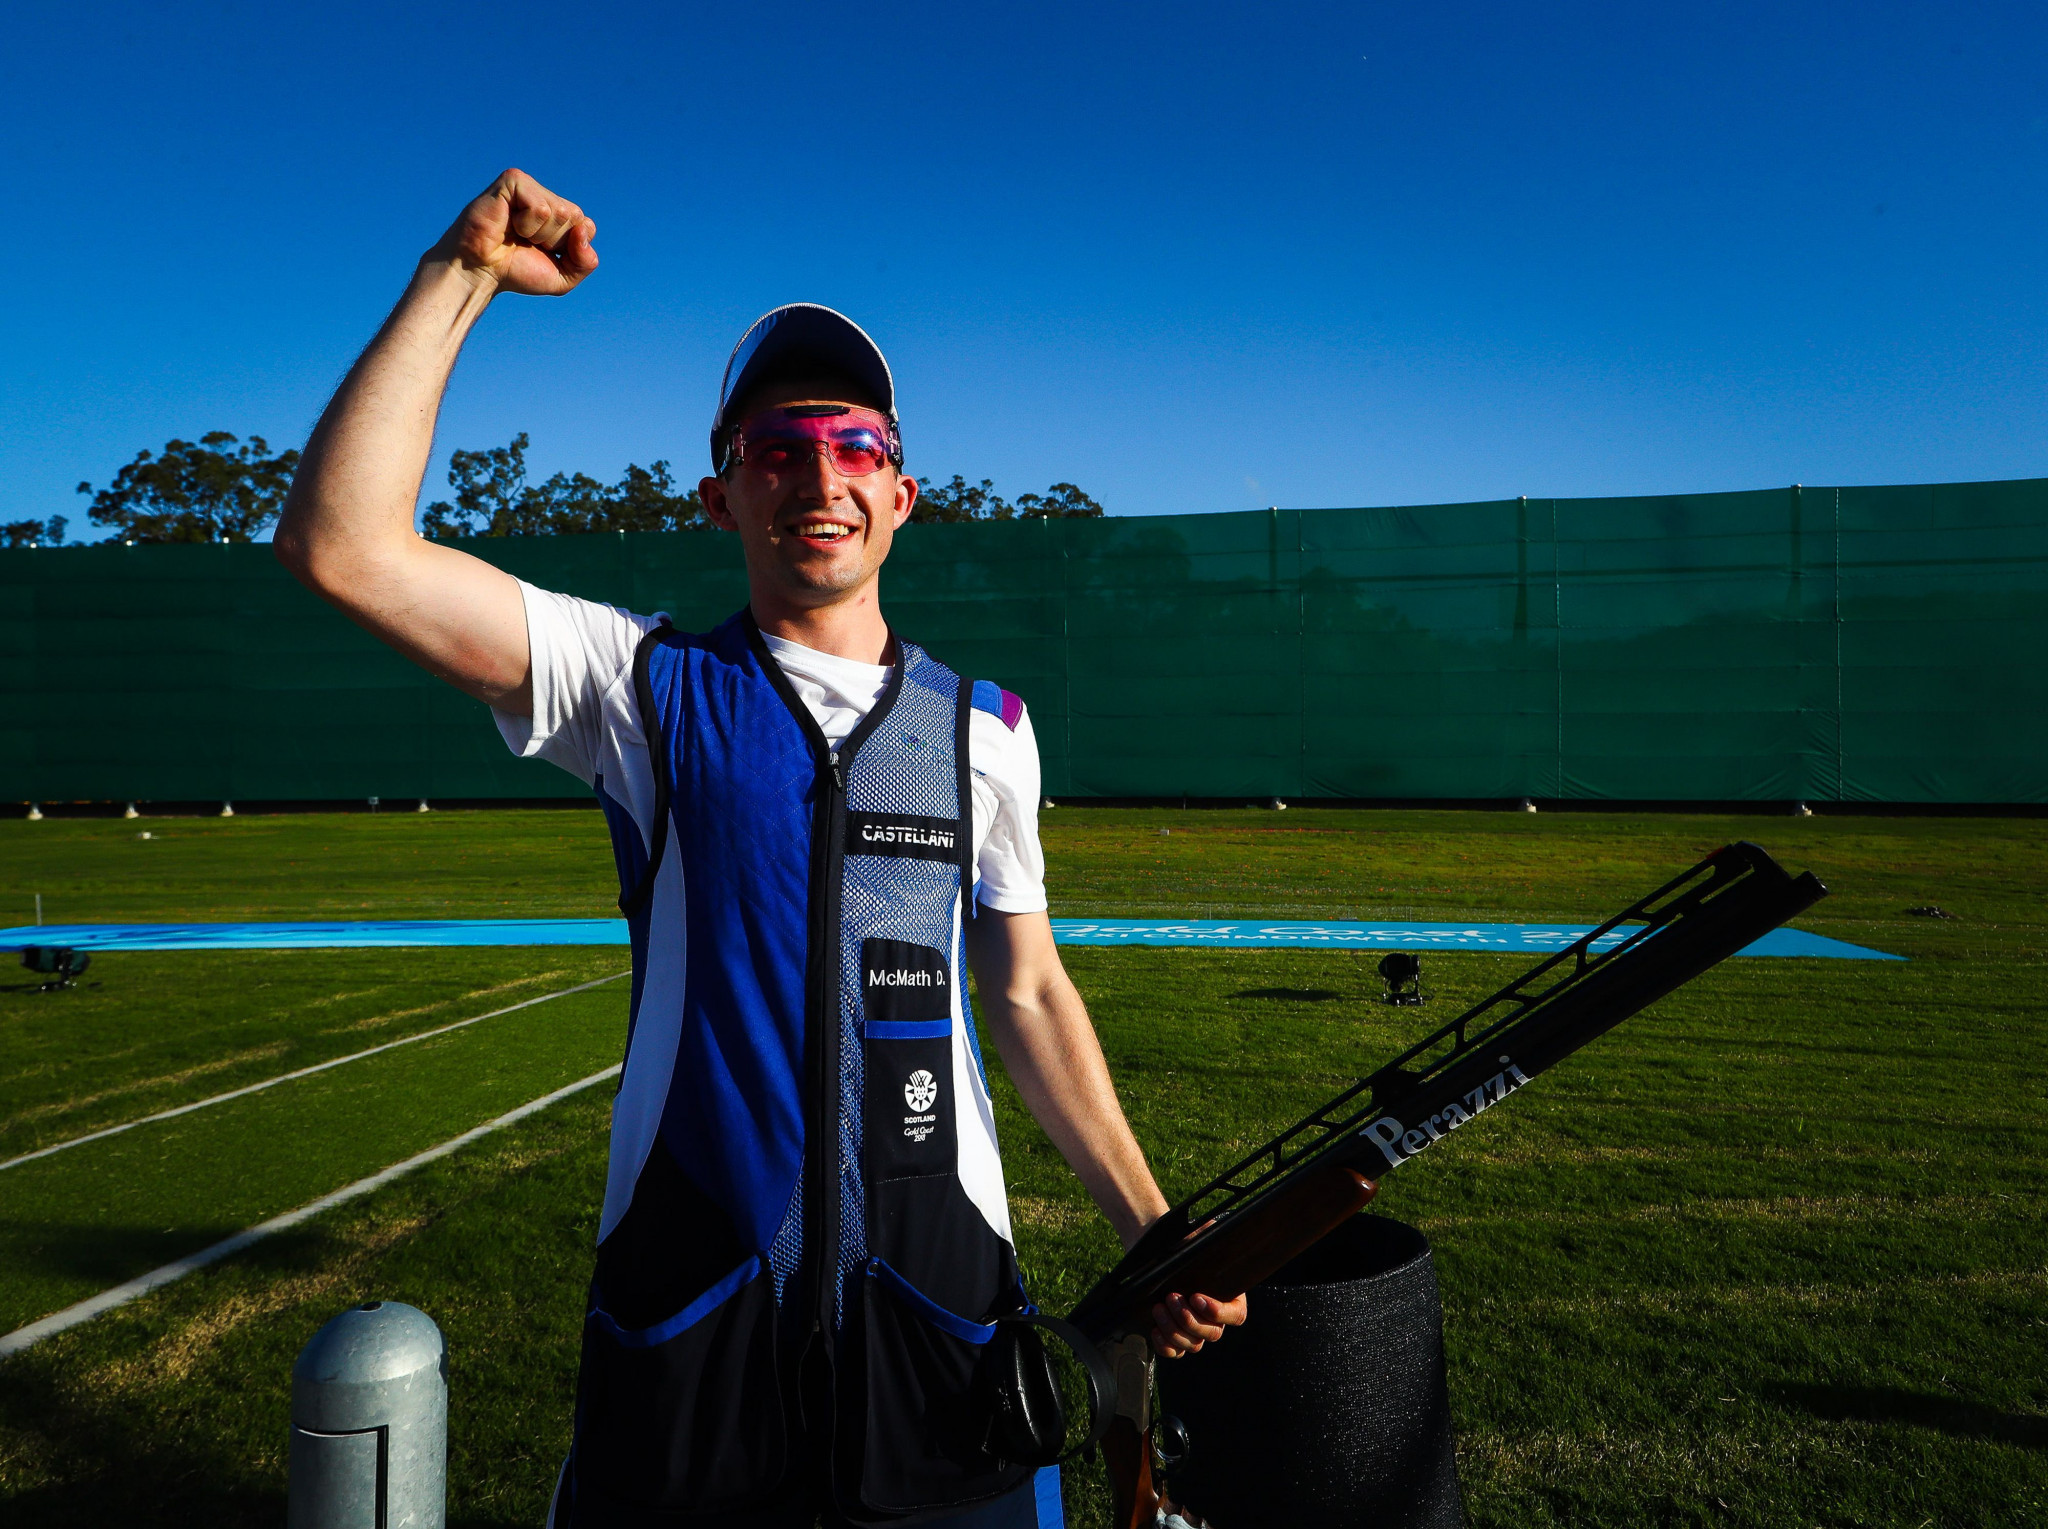 David McMath triumphed in the men's double trap competition ©Getty Images